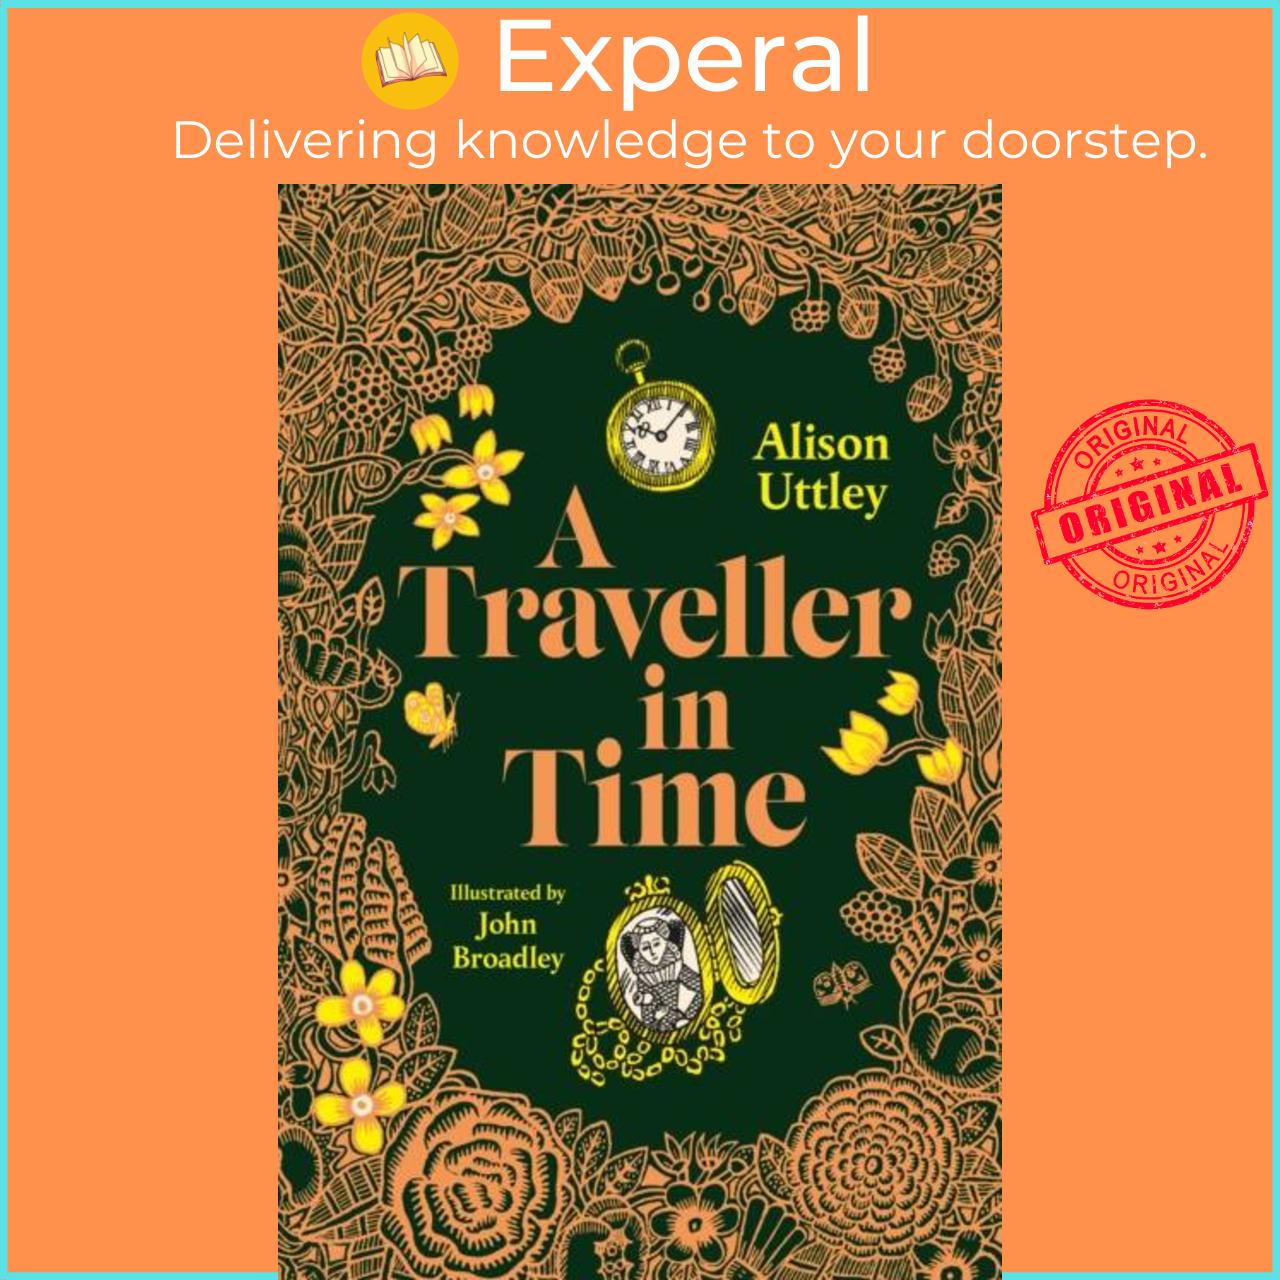 Sách - A Traveller in Time by John Broadley (UK edition, hardcover)